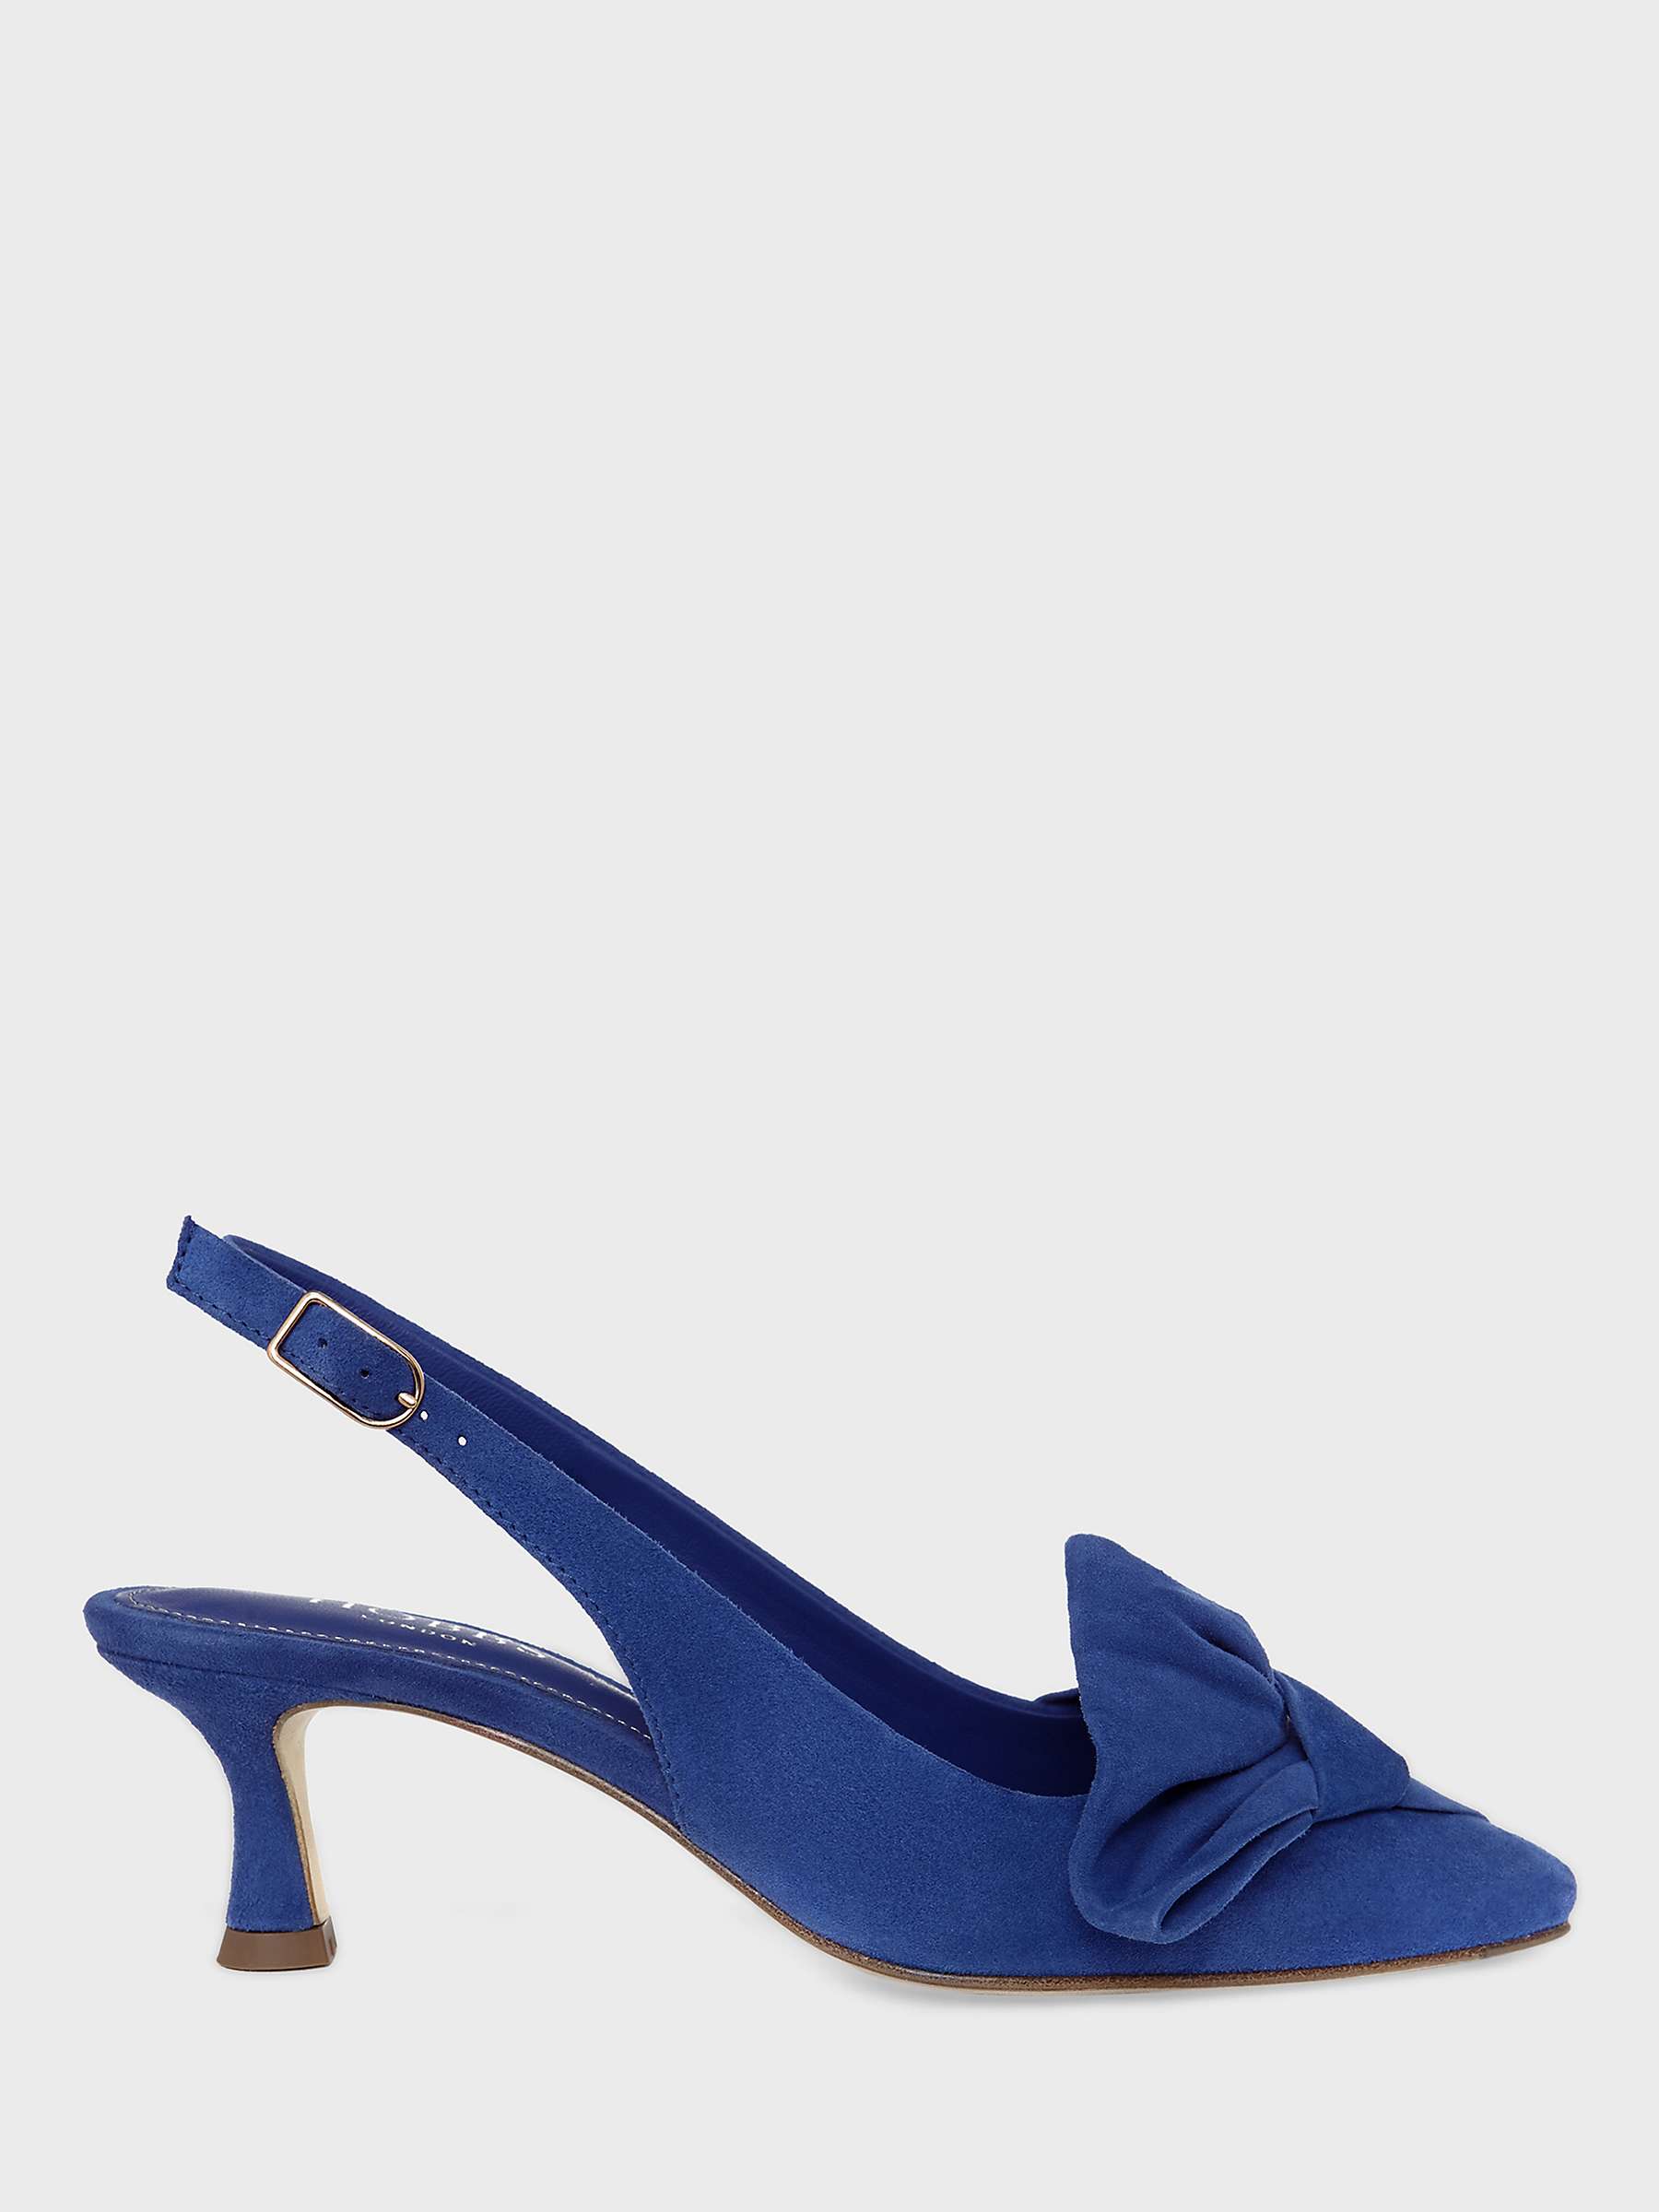 Buy Hobbs Francis Slingback Suede Court Shoes Online at johnlewis.com